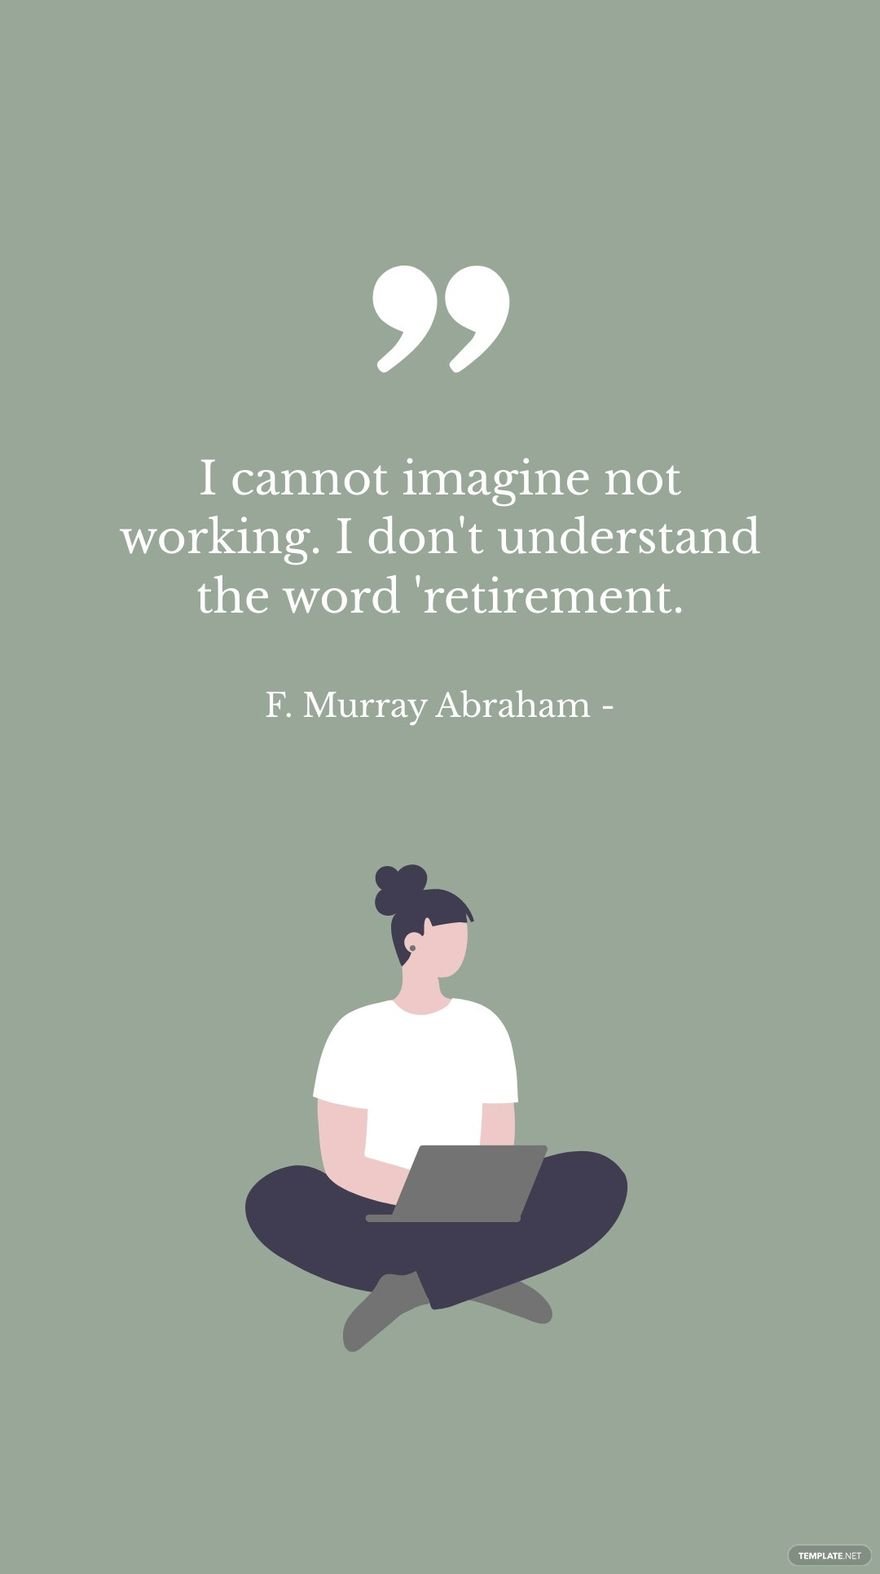 F. Murray Abraham - I cannot imagine not working. I don't understand the word 'retirement. in JPG